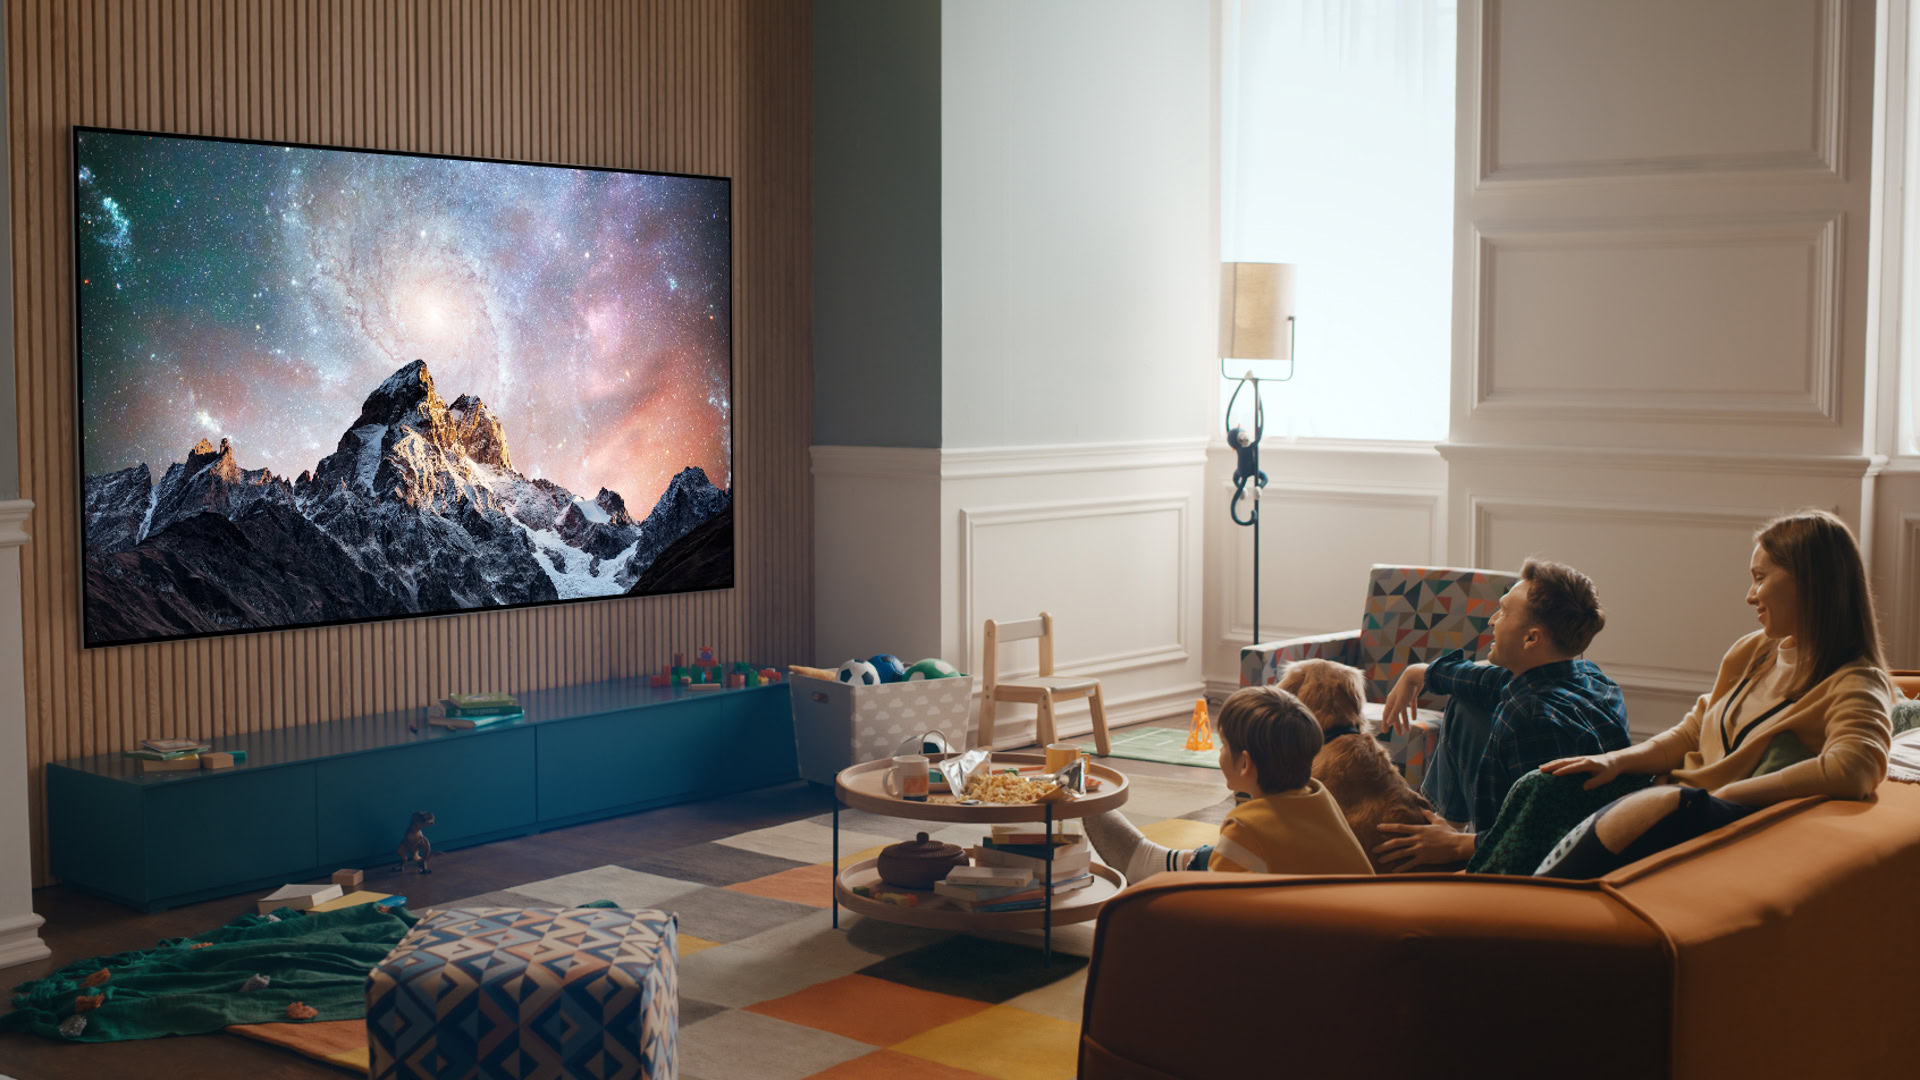 Panasonic's new 2022 flagship TV is the 77-inch LZ2000 OLED